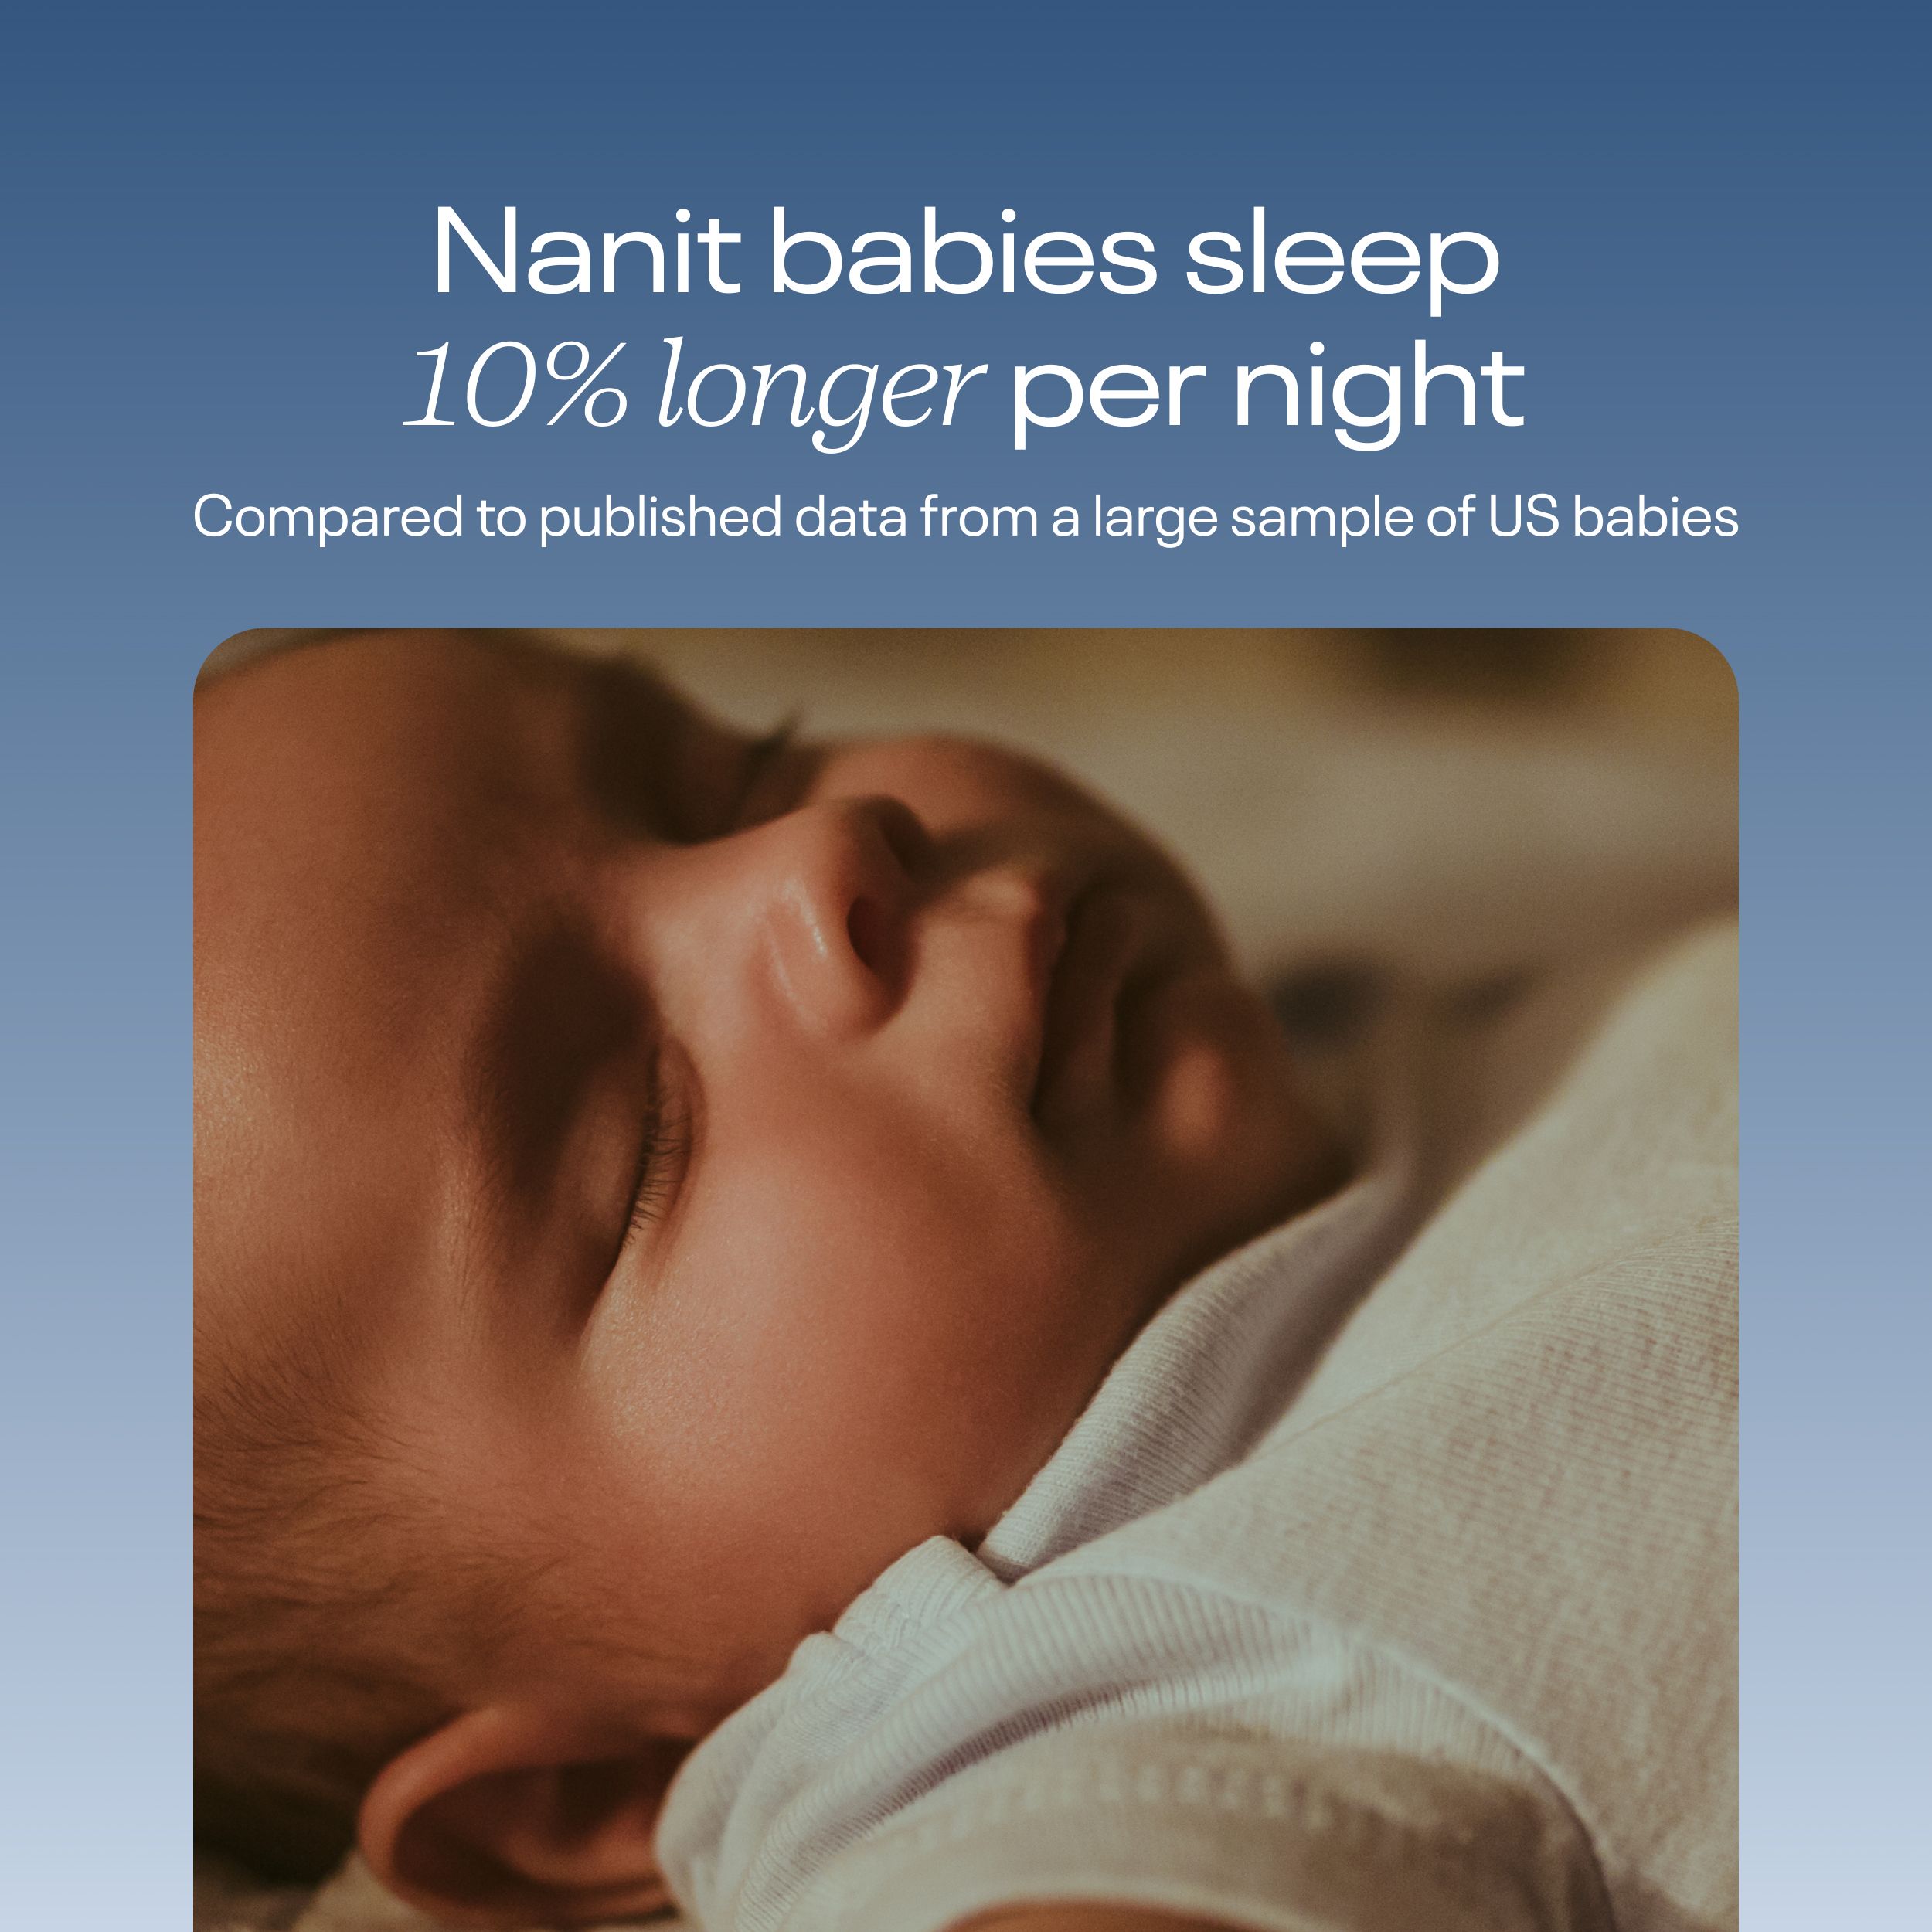 Nanit Pro Smart Baby Monitor & Floor Stand